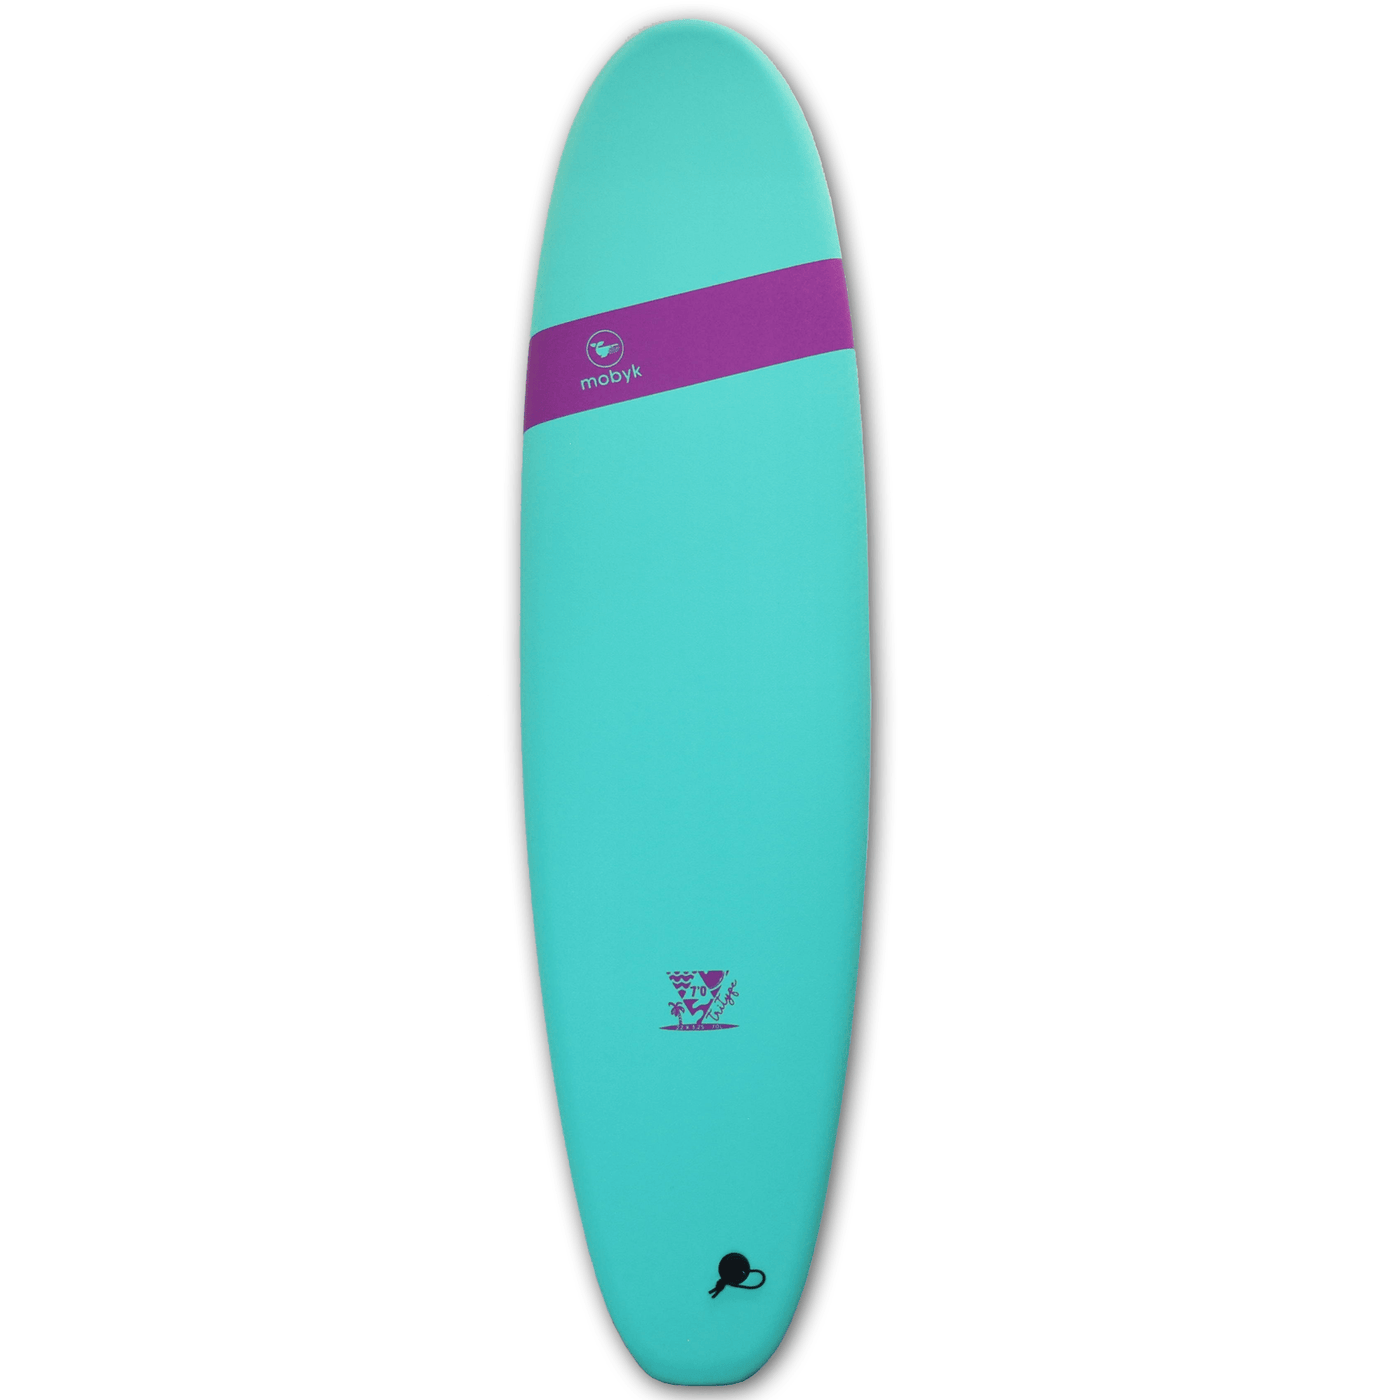 Mobyk 7'0 Classic Long Softboard - Turquoise Mobyk